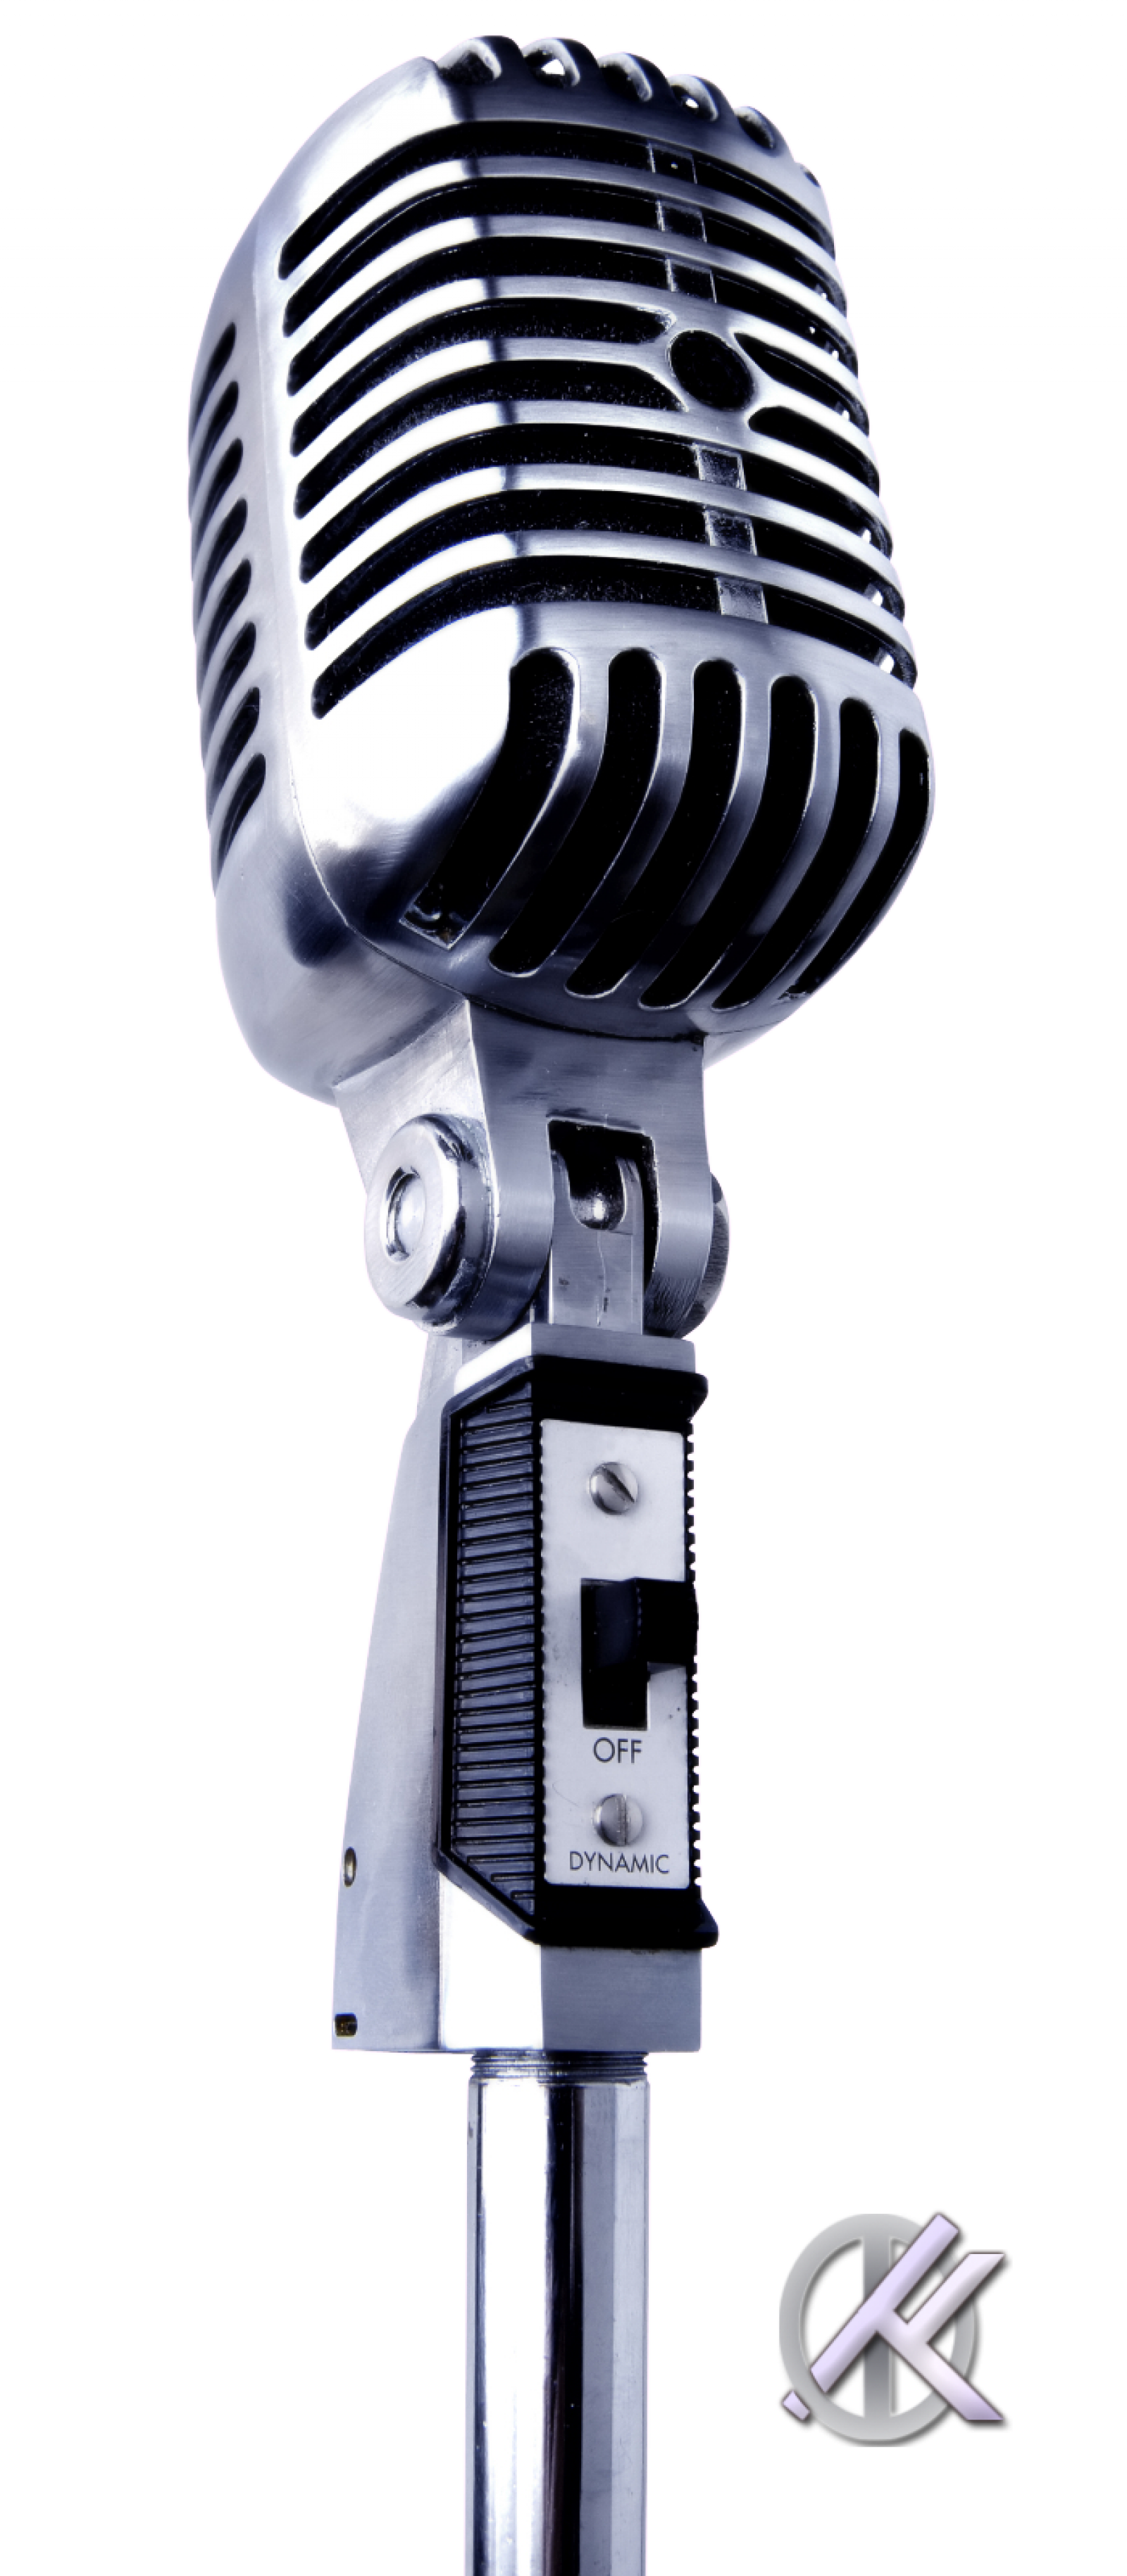 Microphone PNG, Microphone Transparent Background - FreeIconsPNG